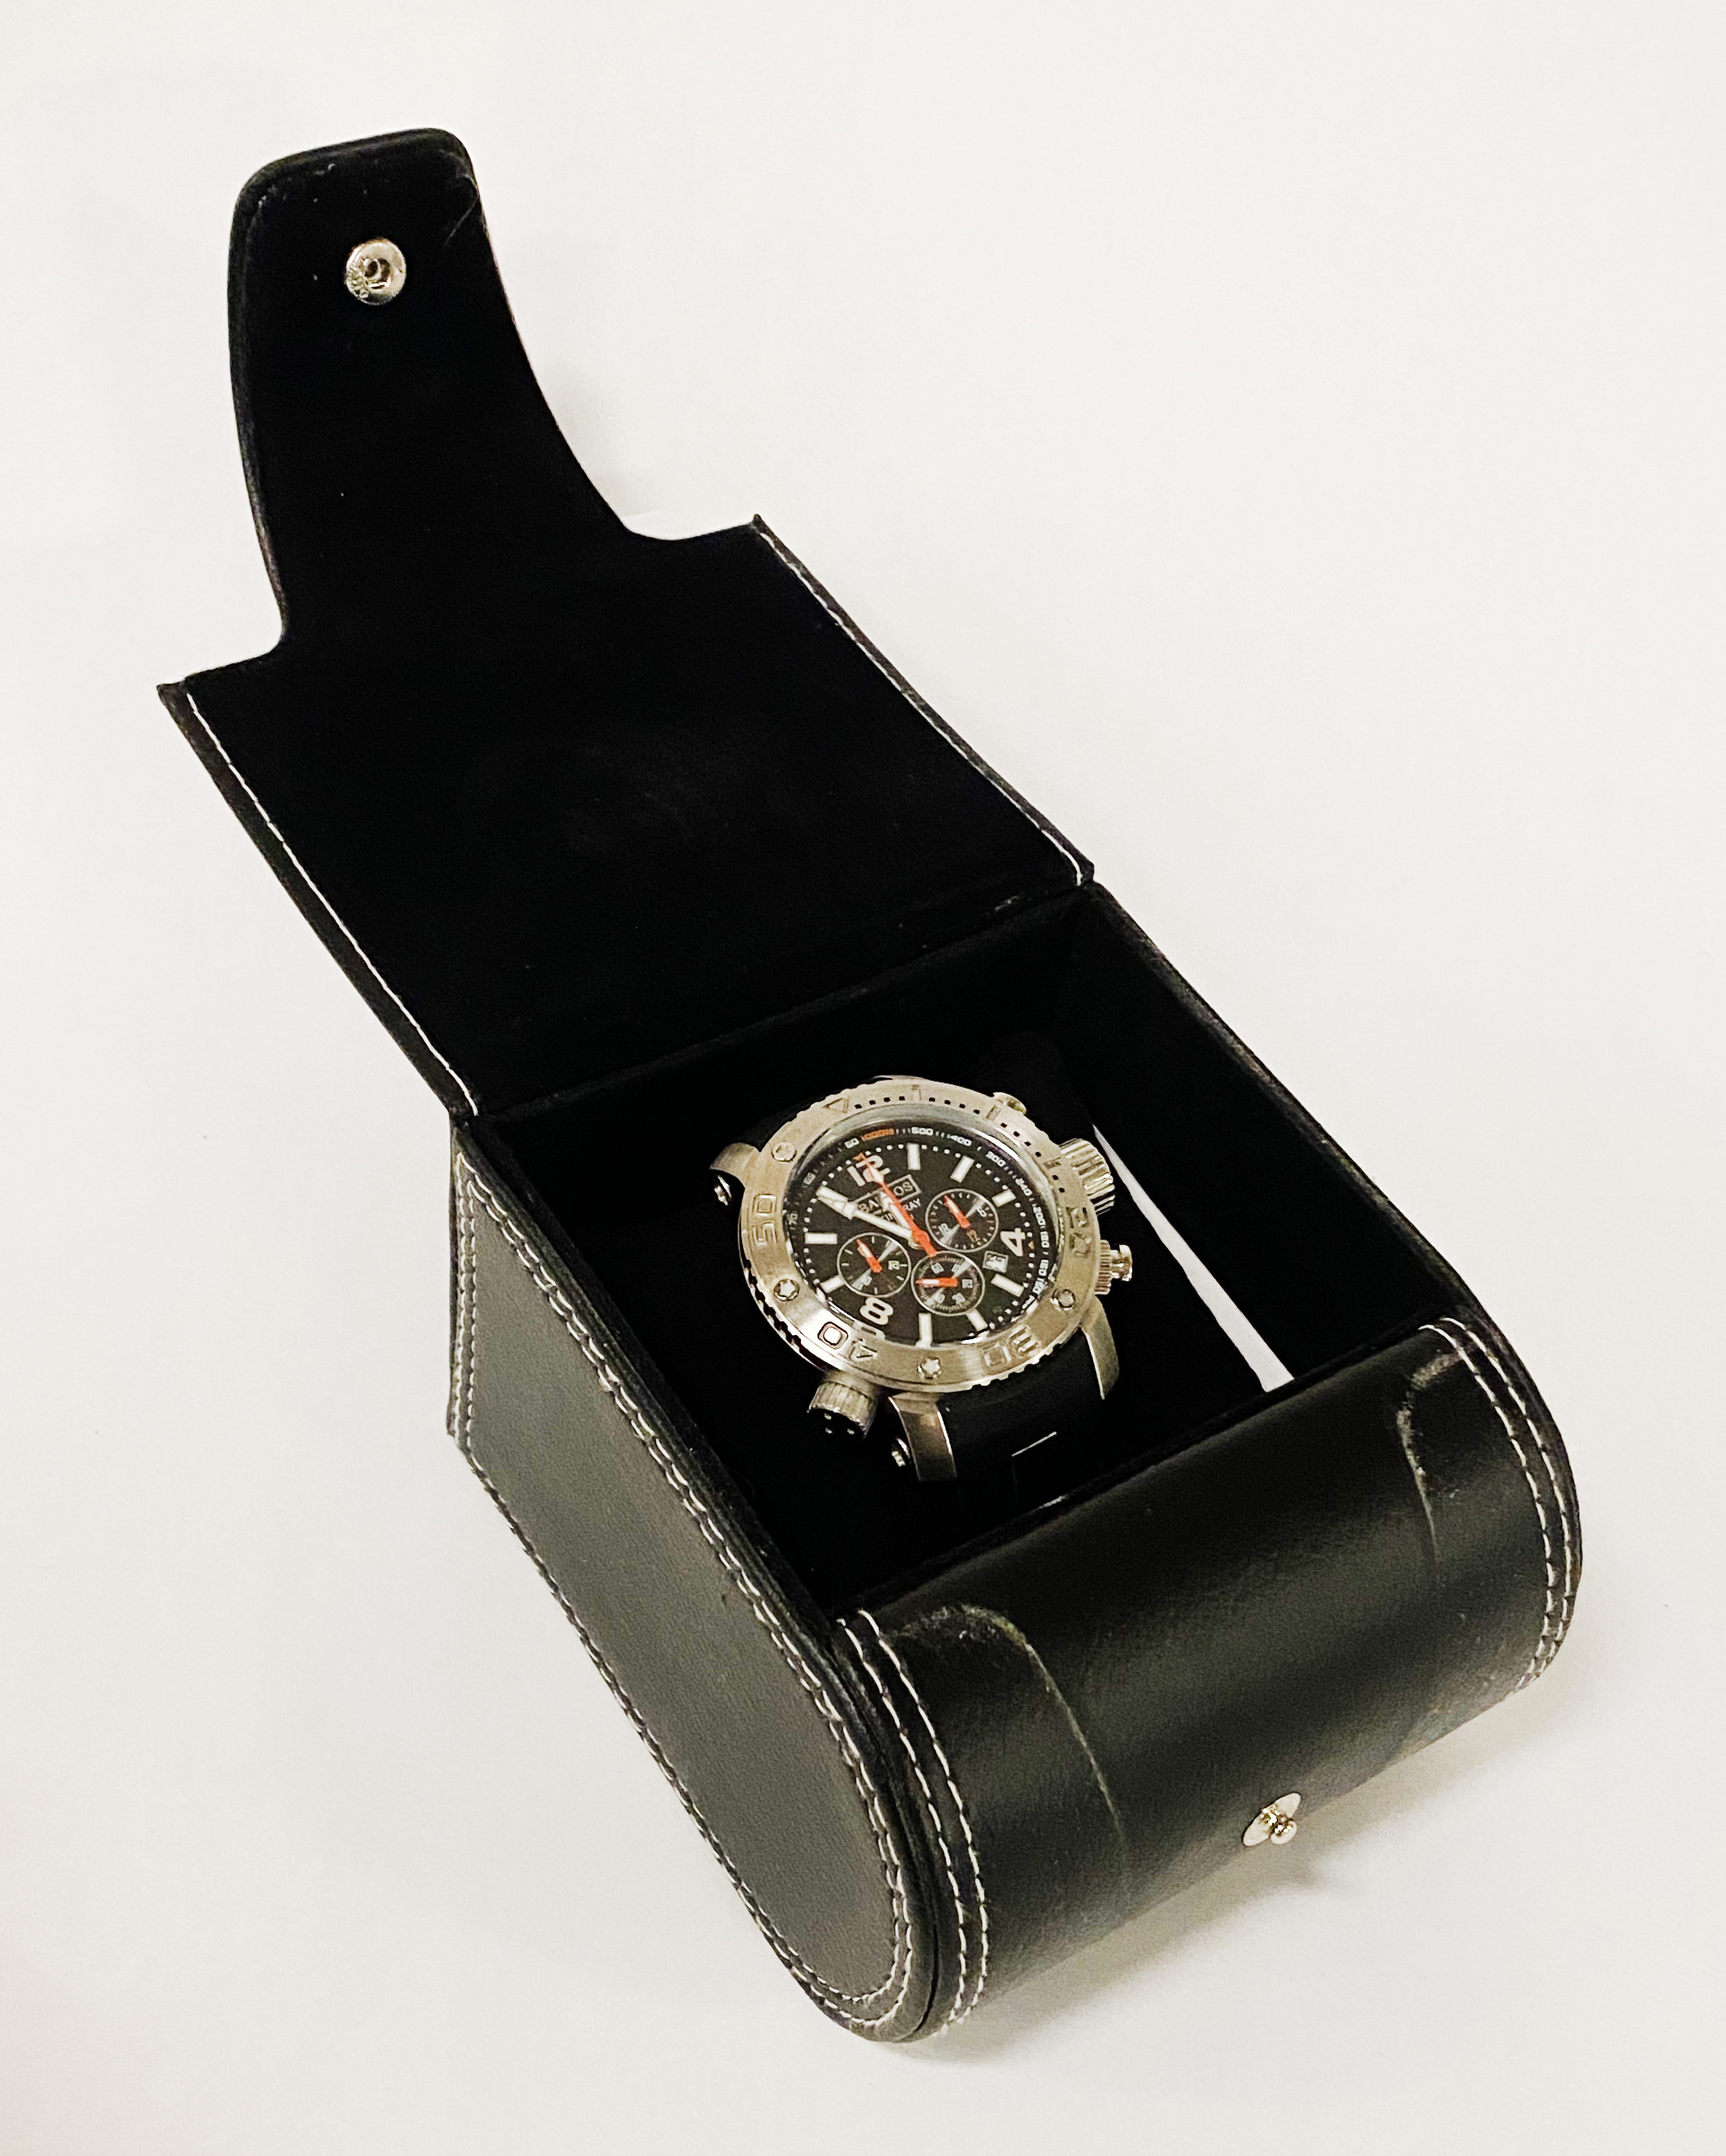 BARBOS STINGRAY GENTS WATCH - Image 2 of 2